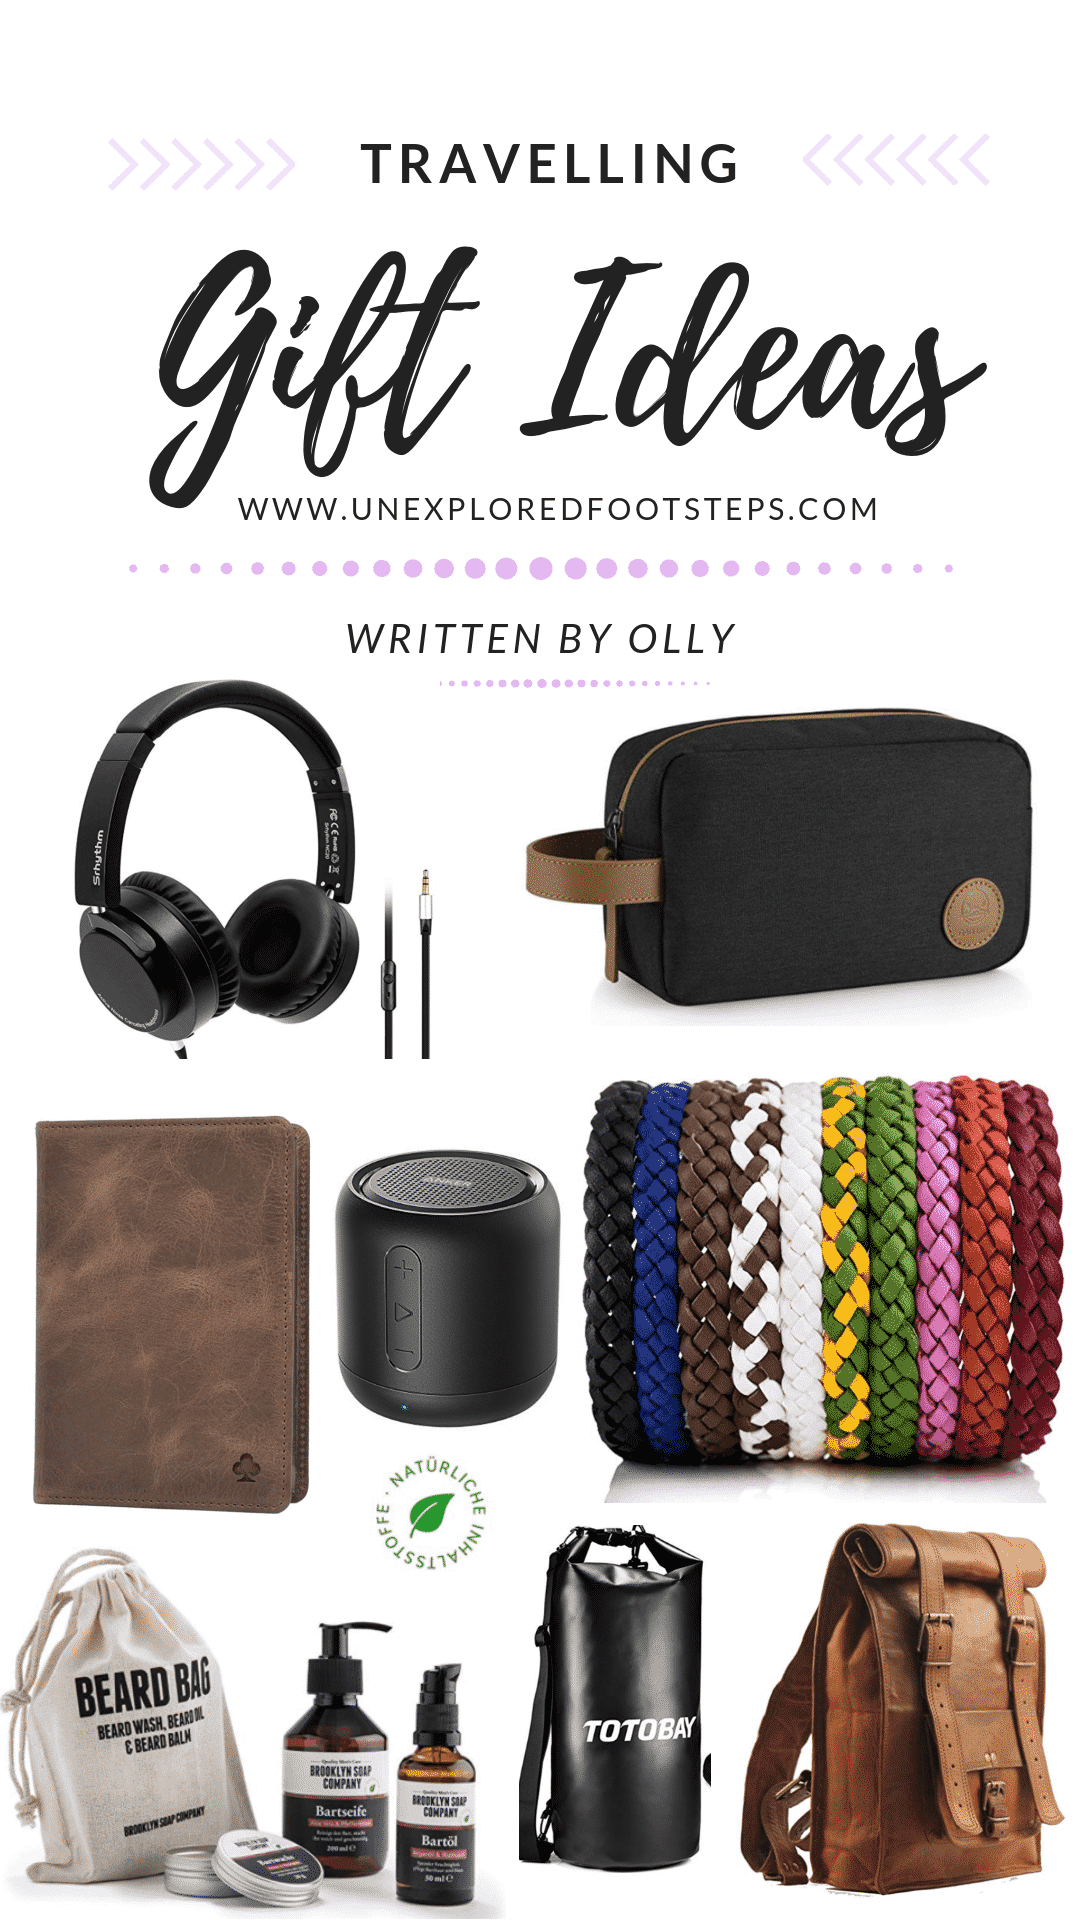 Travelling gift ideas for him